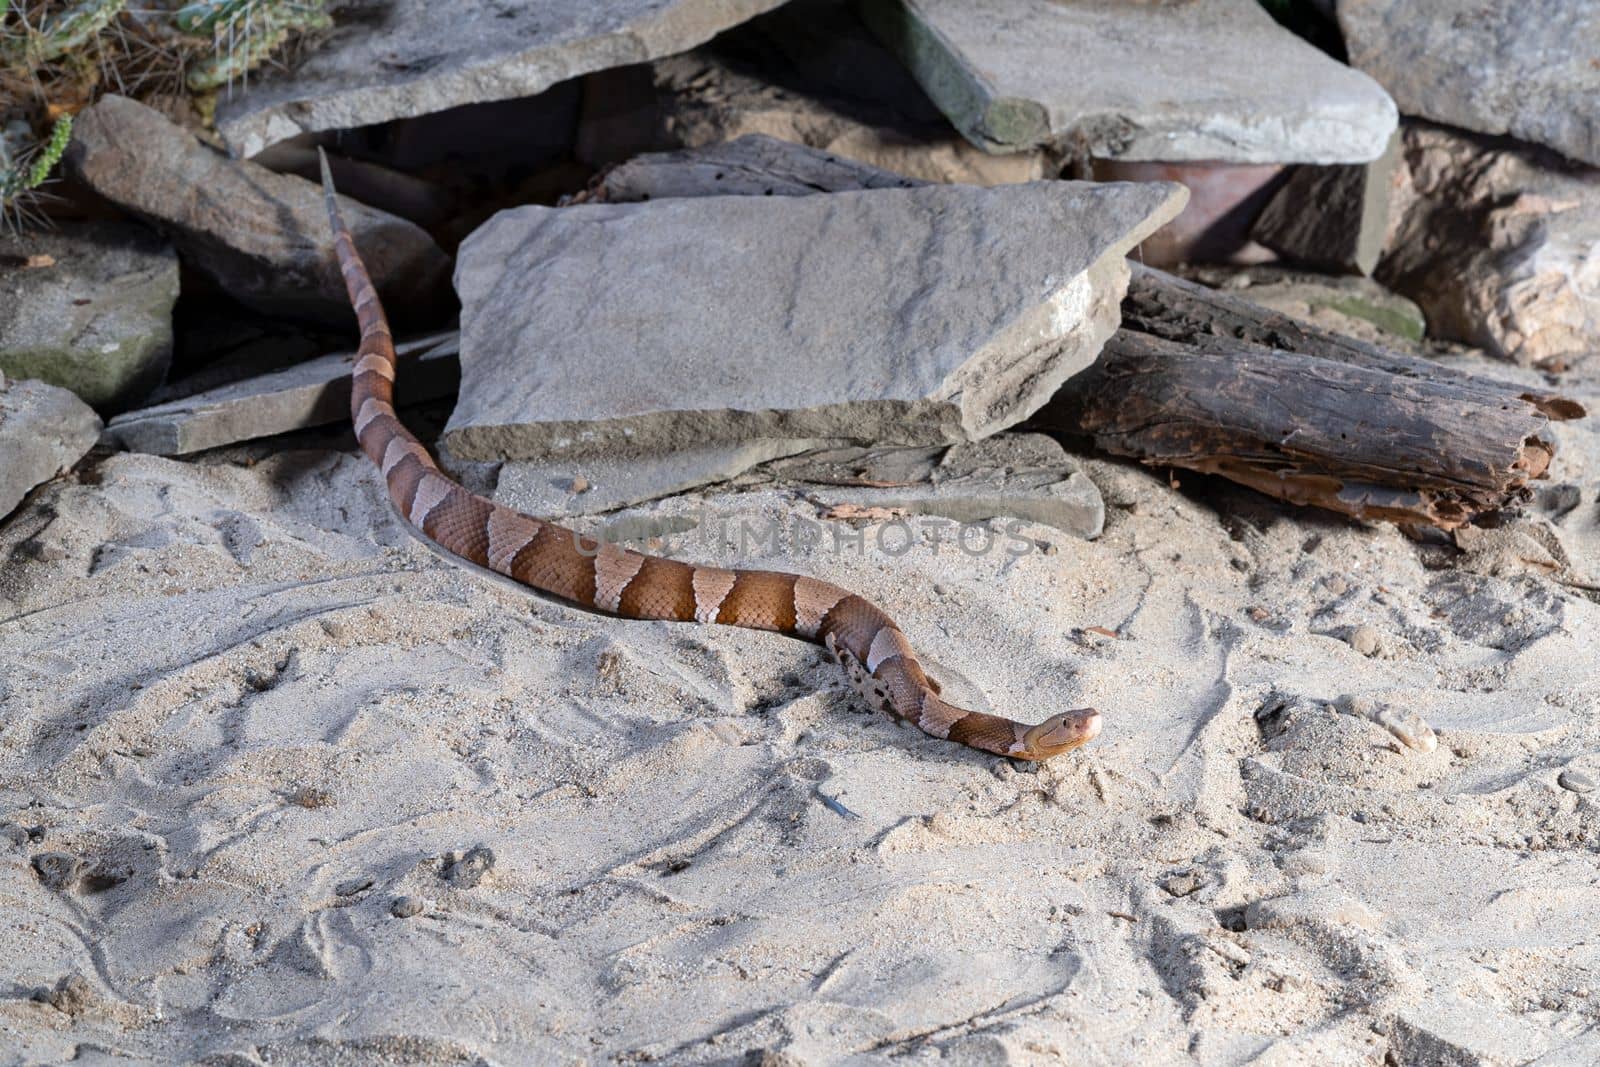 Close up image of Copperhead (Agkistrodon contortrix)